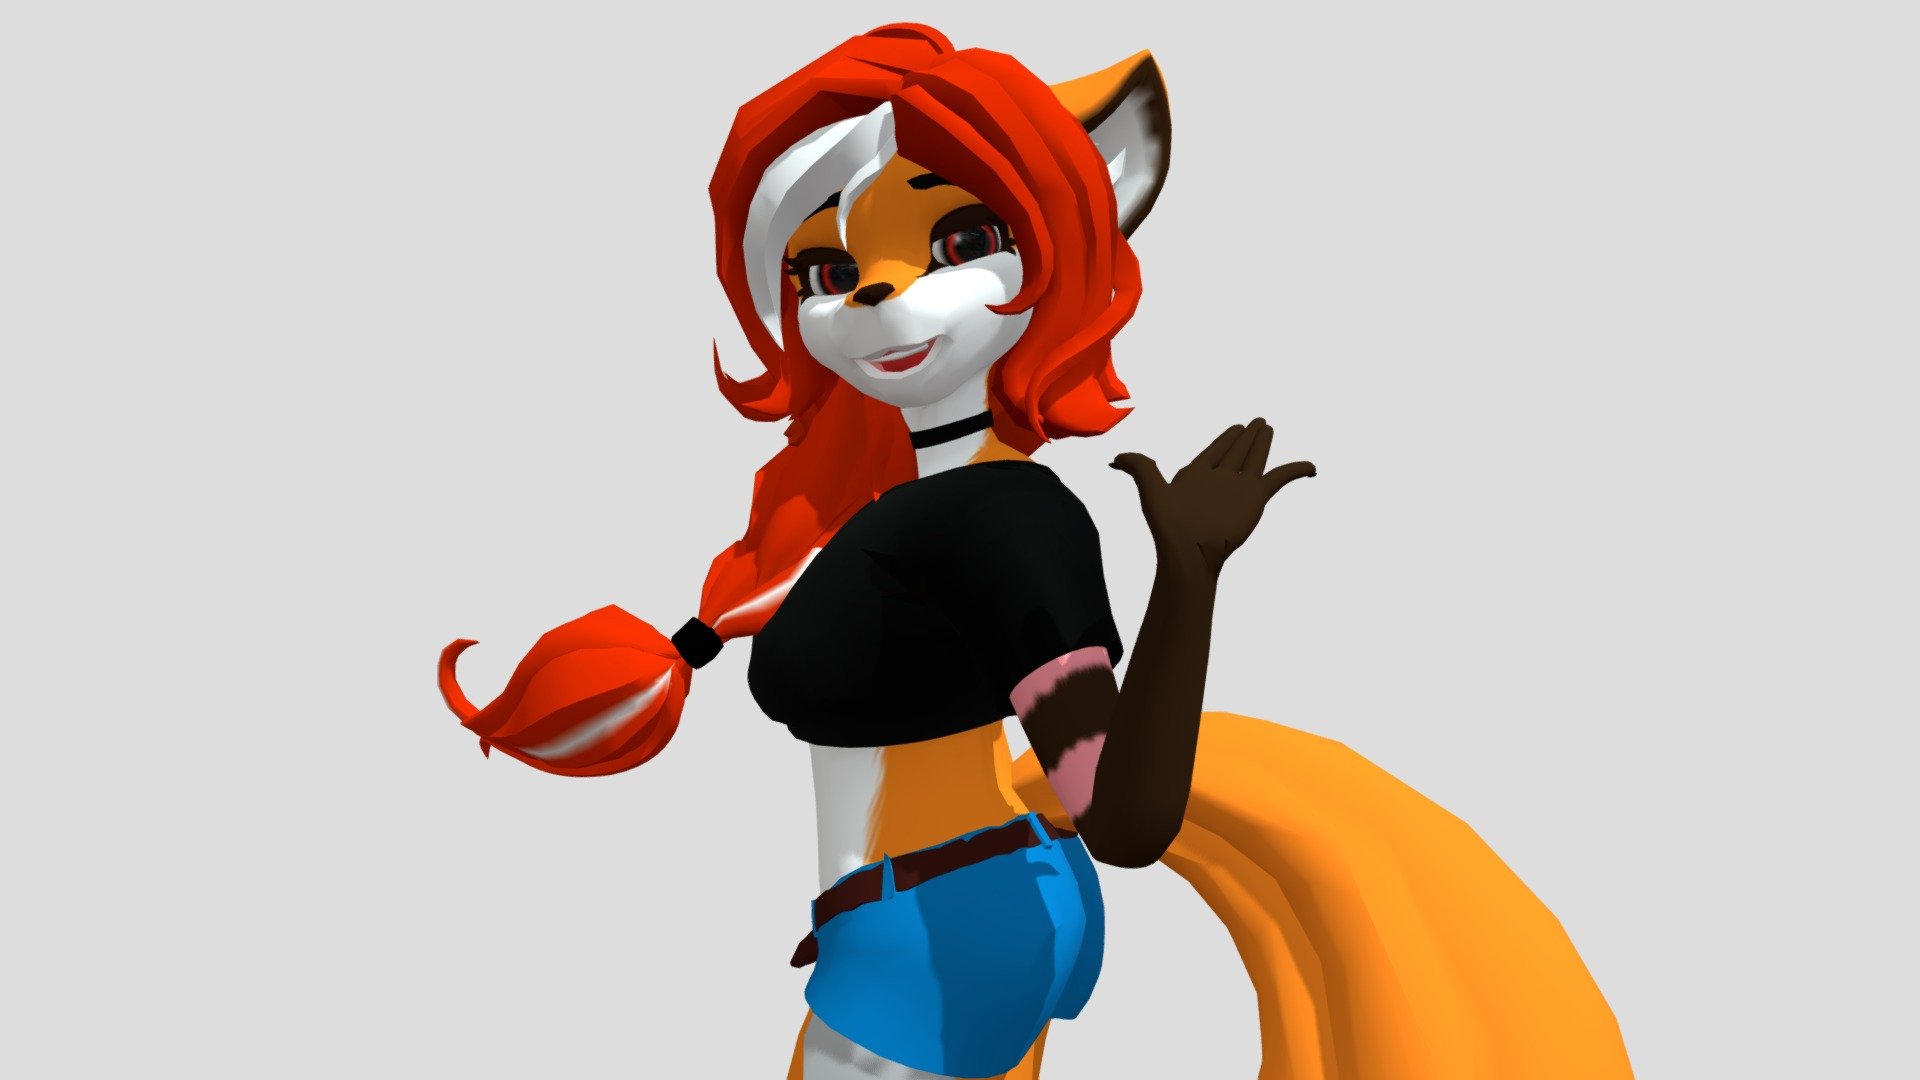 Furry 3d games. Фурри 3д. 3д фурри девушки Vore. Модели блендер 3d фурри. VRCHAT furry NSFW 3d model.